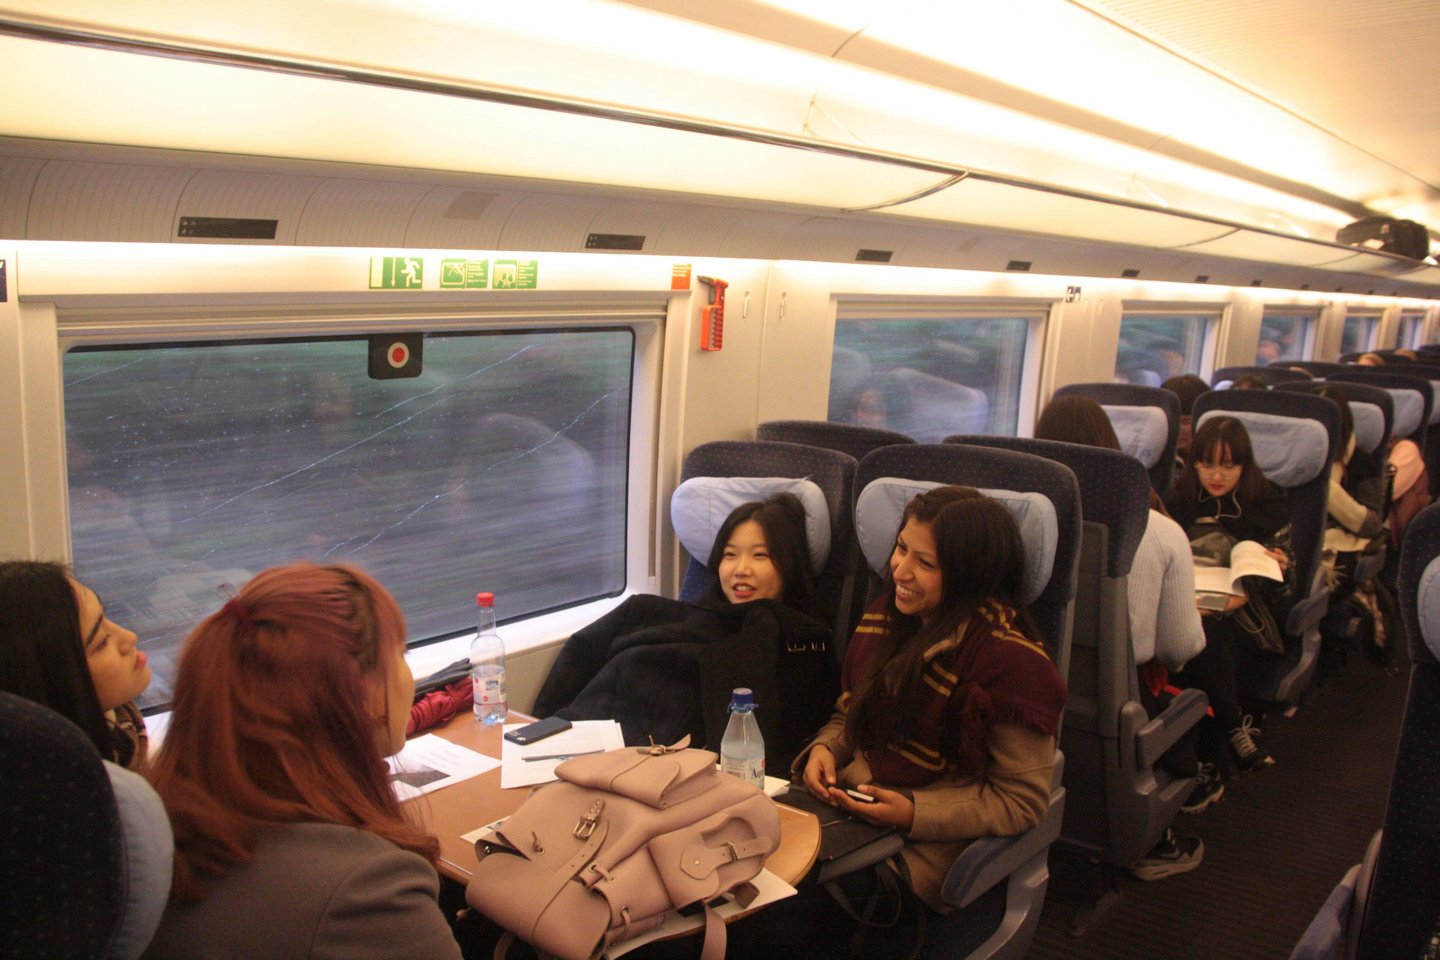 Students in the train on their way to Brussels.